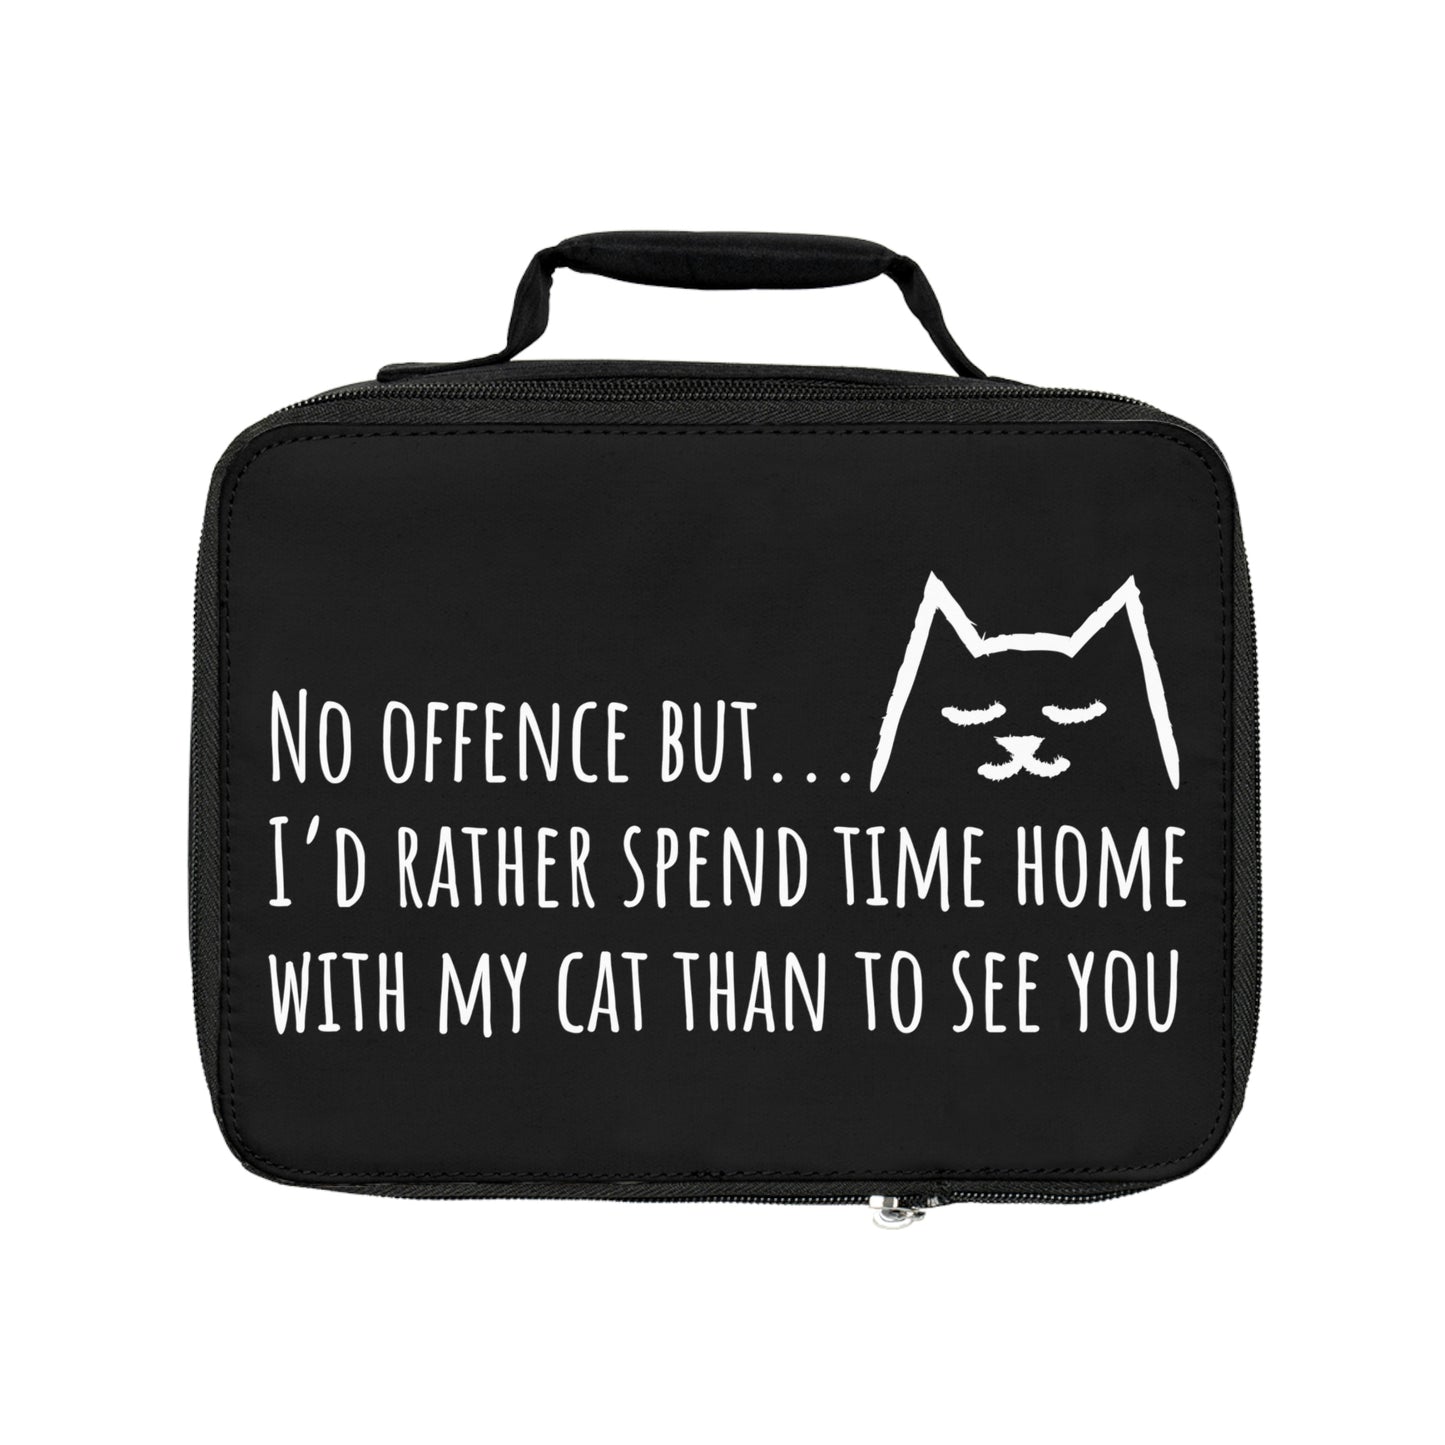 Cat quote lunch bag, funny cat lunch tote, sarcastic cat picnic bag, introverted cat owner lunch bag, back to school gift, cat lover gift